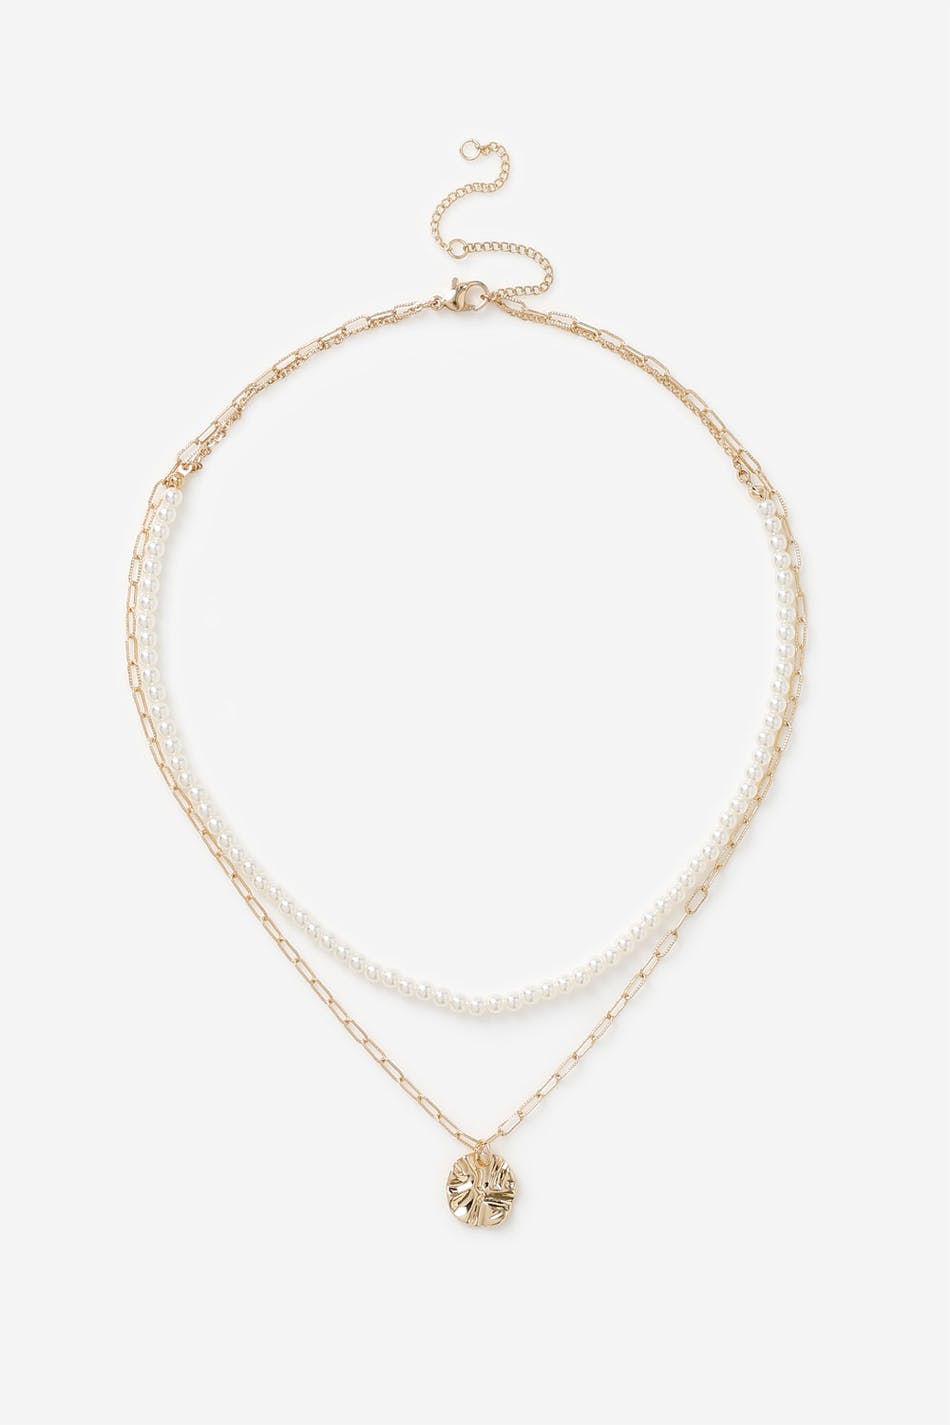 GOLD PEARL CHAIN MROW NW